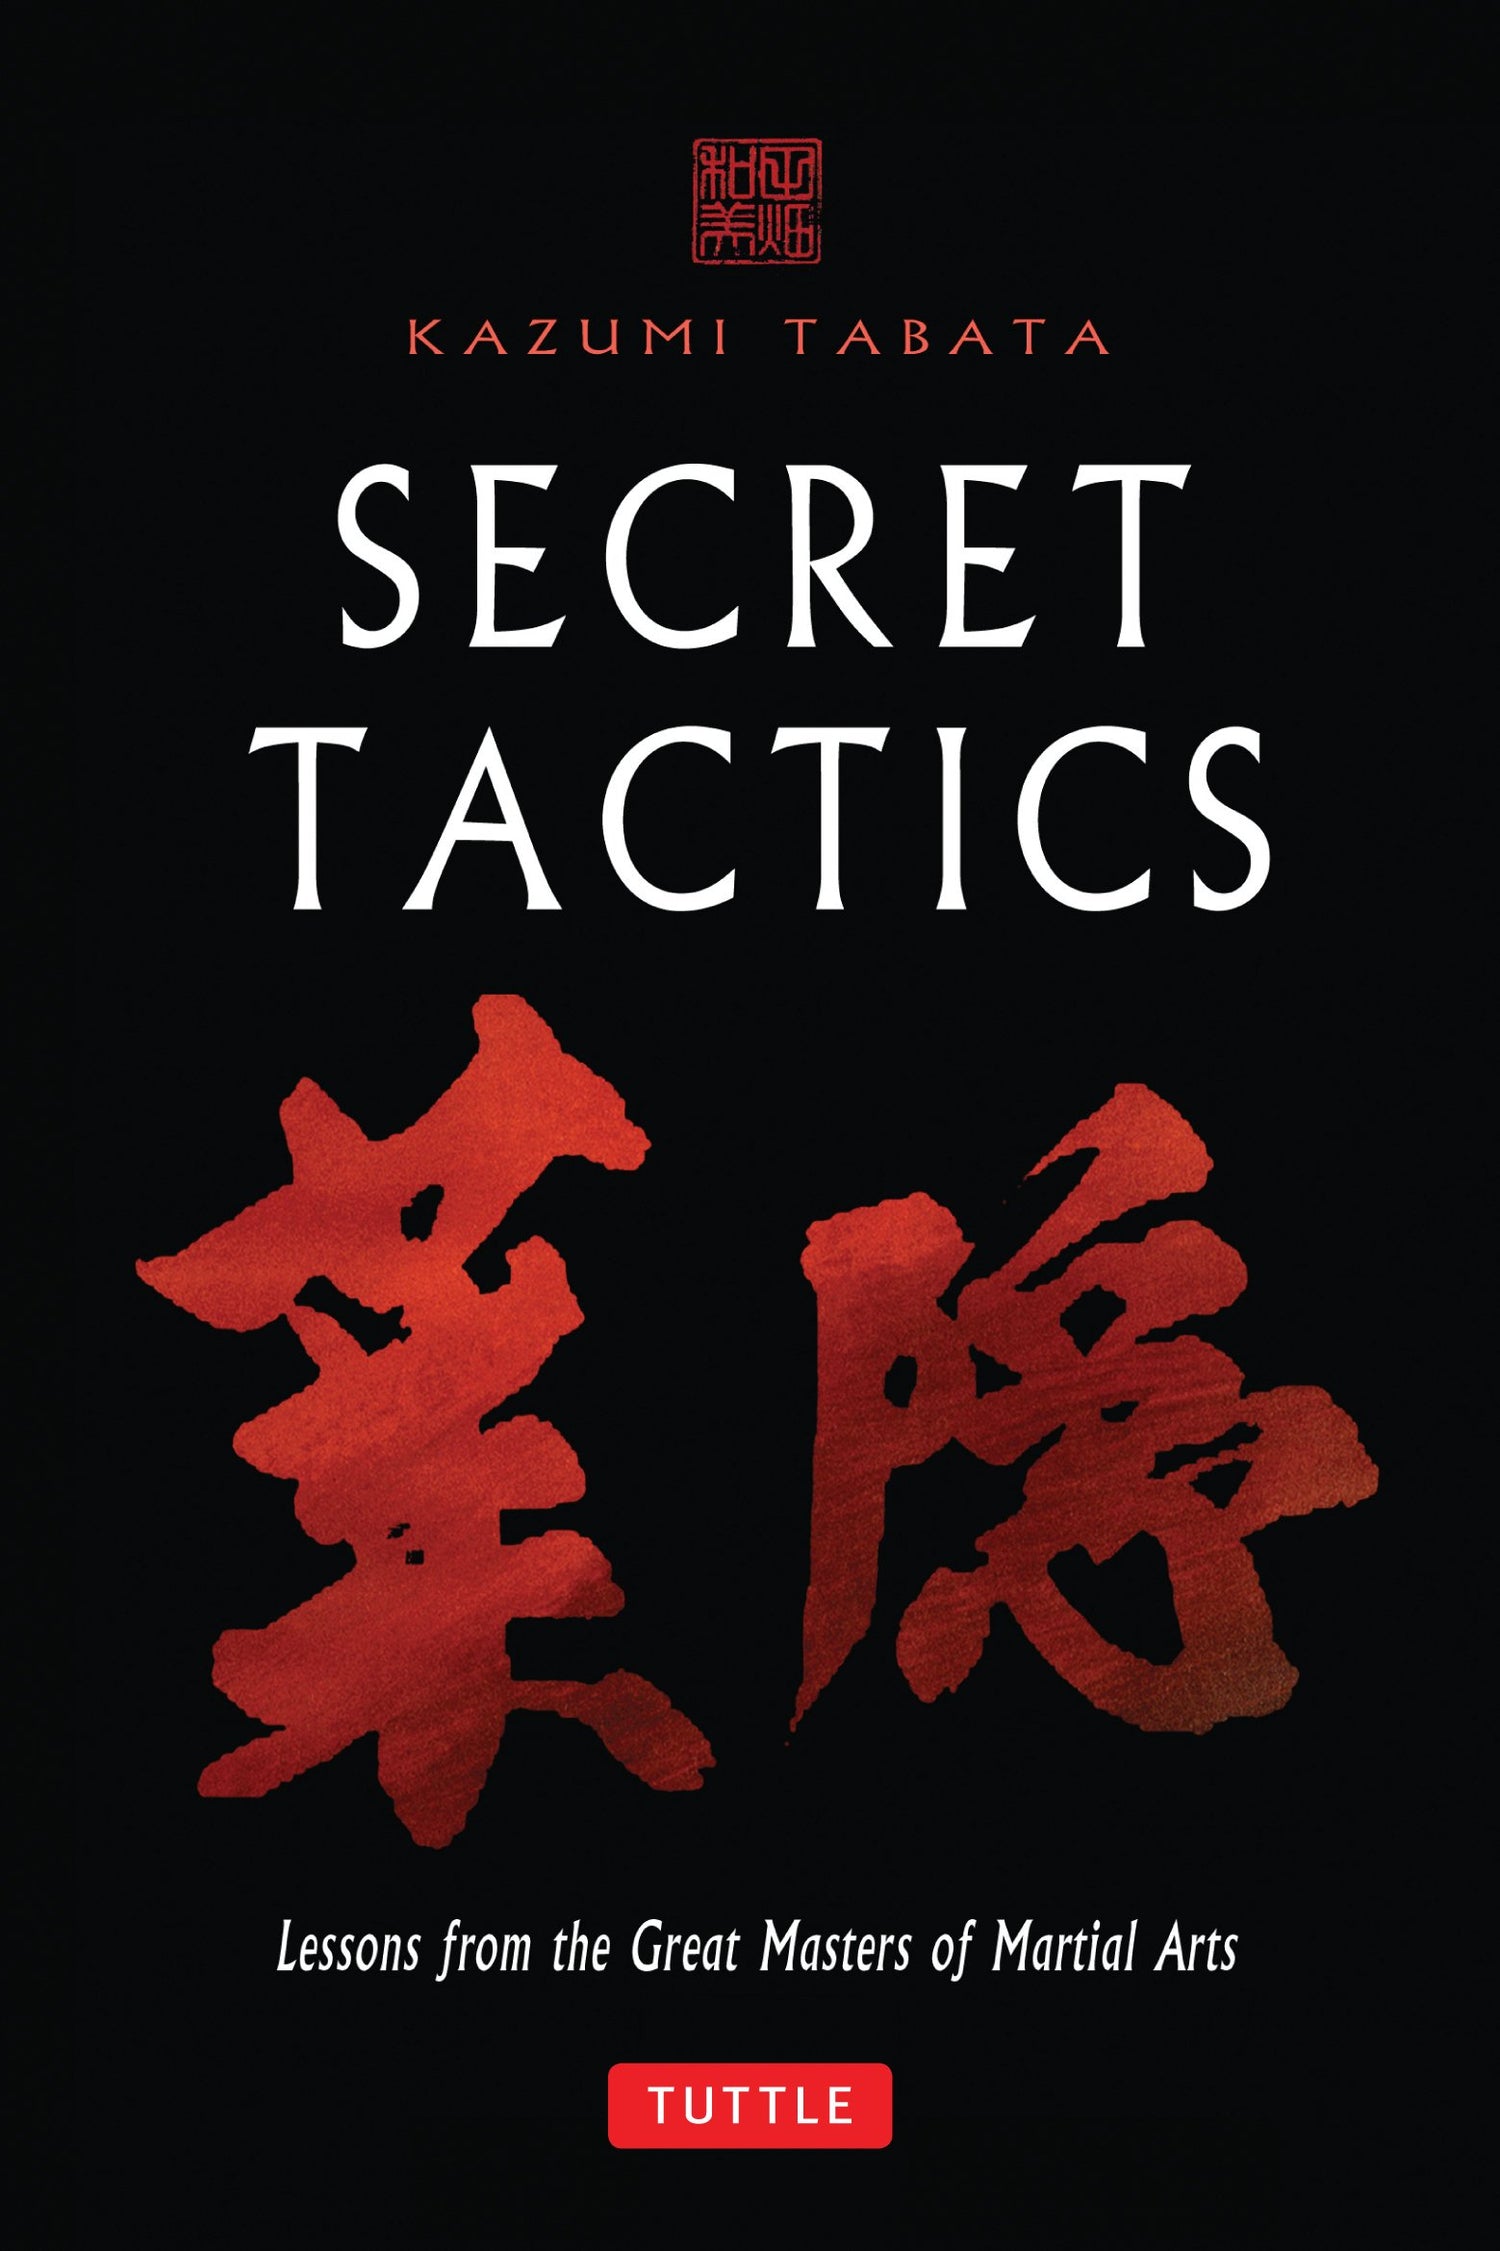 Secret Tactics: Lessons from the Great Masters of Martial Arts Book by Kazumi Tabata (Hardcover) (Preowned)